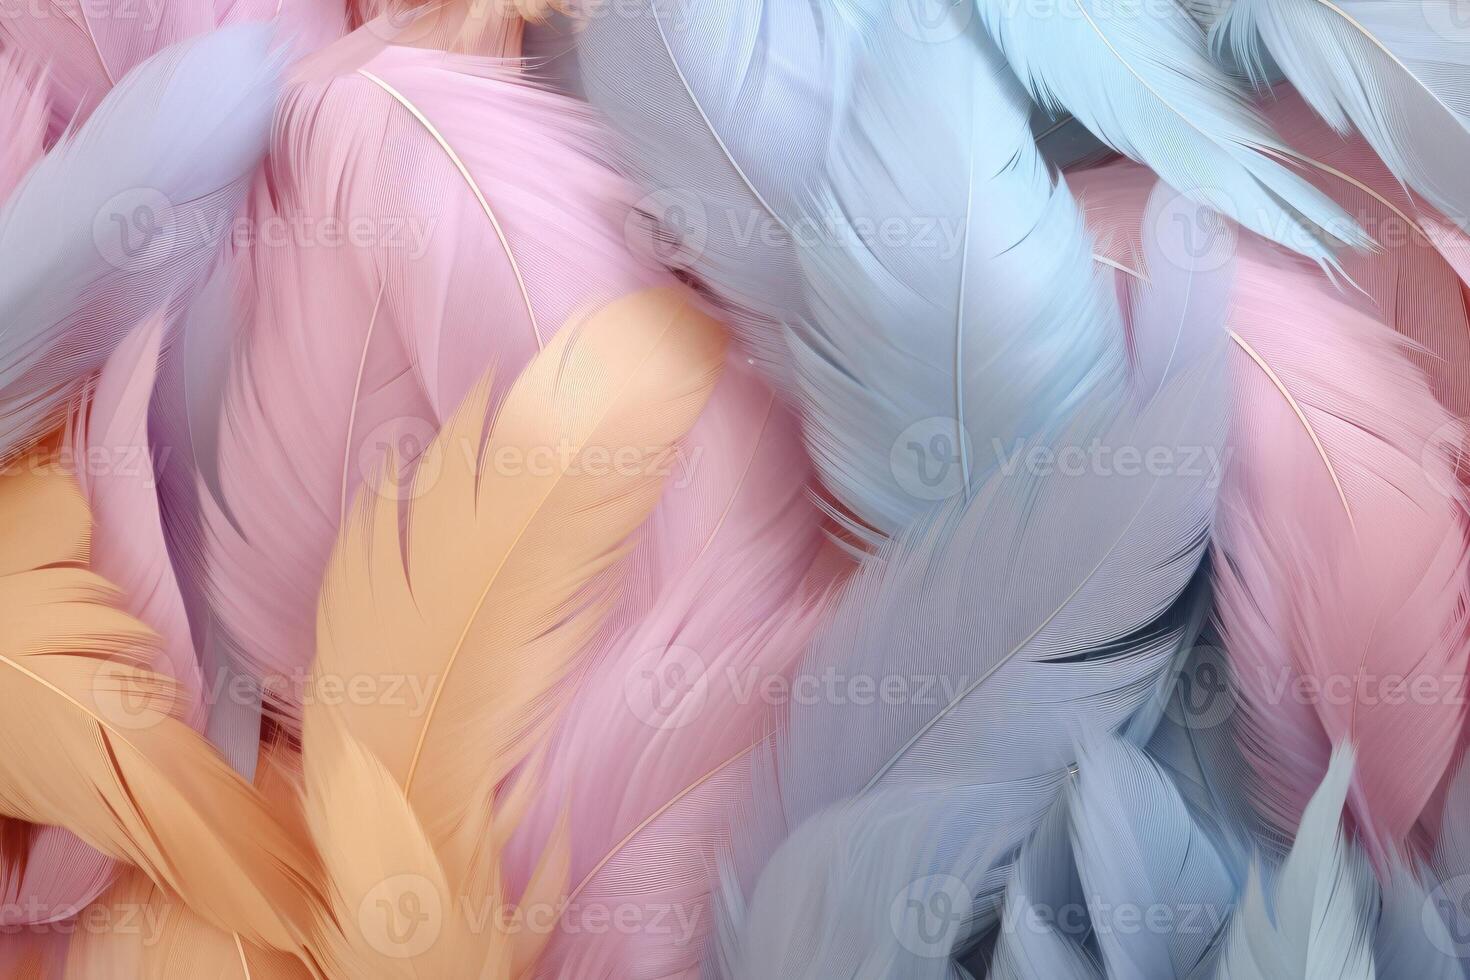 Pastel Feathers Background, pastel color feather abstract background texture, pastel feathers wallpaper, pastel bird feathers pattern, photo